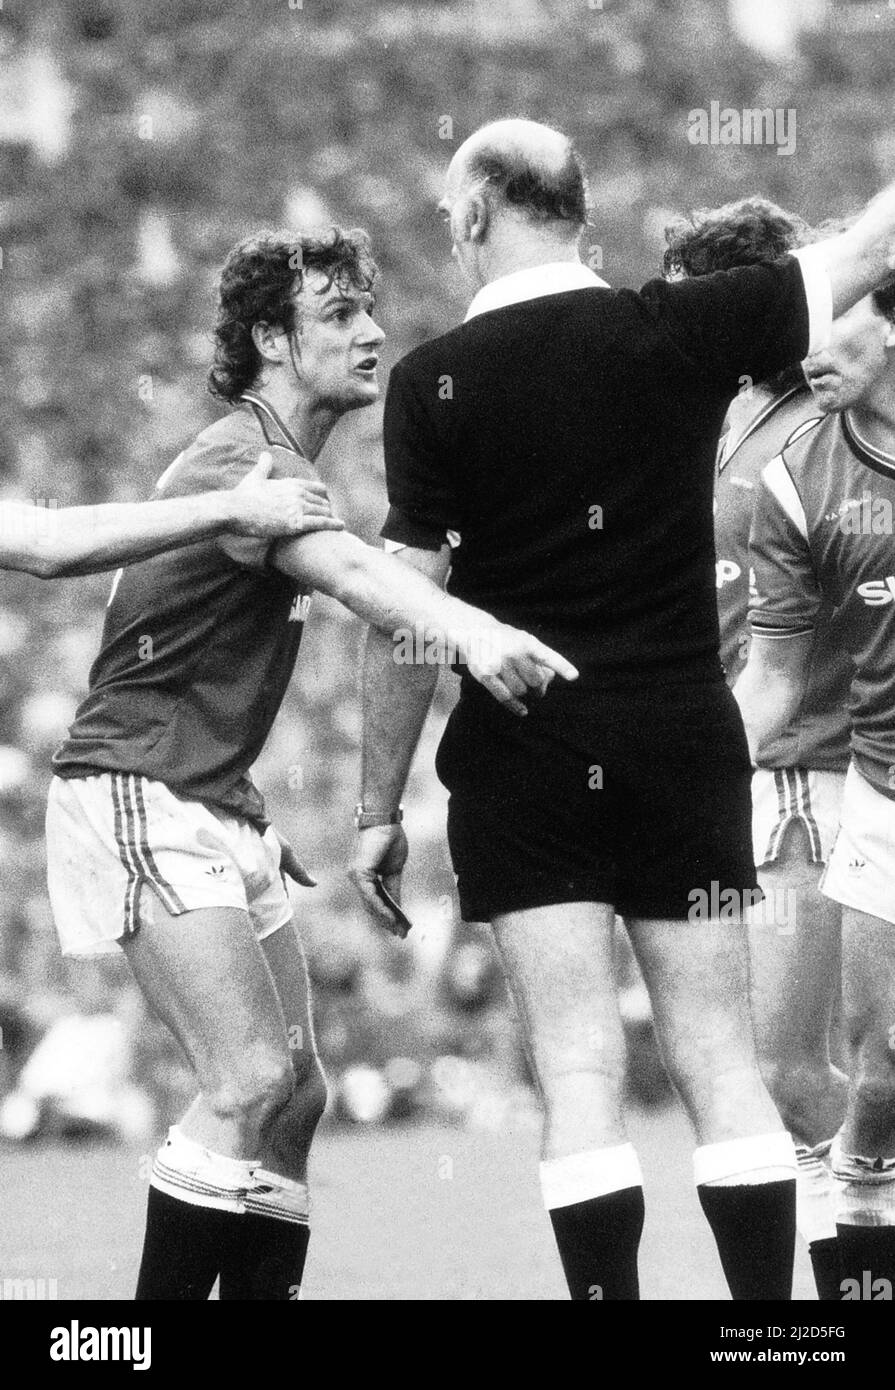 Manchester United v Everton FA Cup Final at Wembley Stadium 18th May 1985. Kevin Moran of Manchester United is sent off May 1985 by referee Peter Willis in the 1985 FA Cup Final at Wembley Moran was the first player to be sent off in a FA  Cup Final   Final score: Manchester United 0-1 Everton Stock Photo